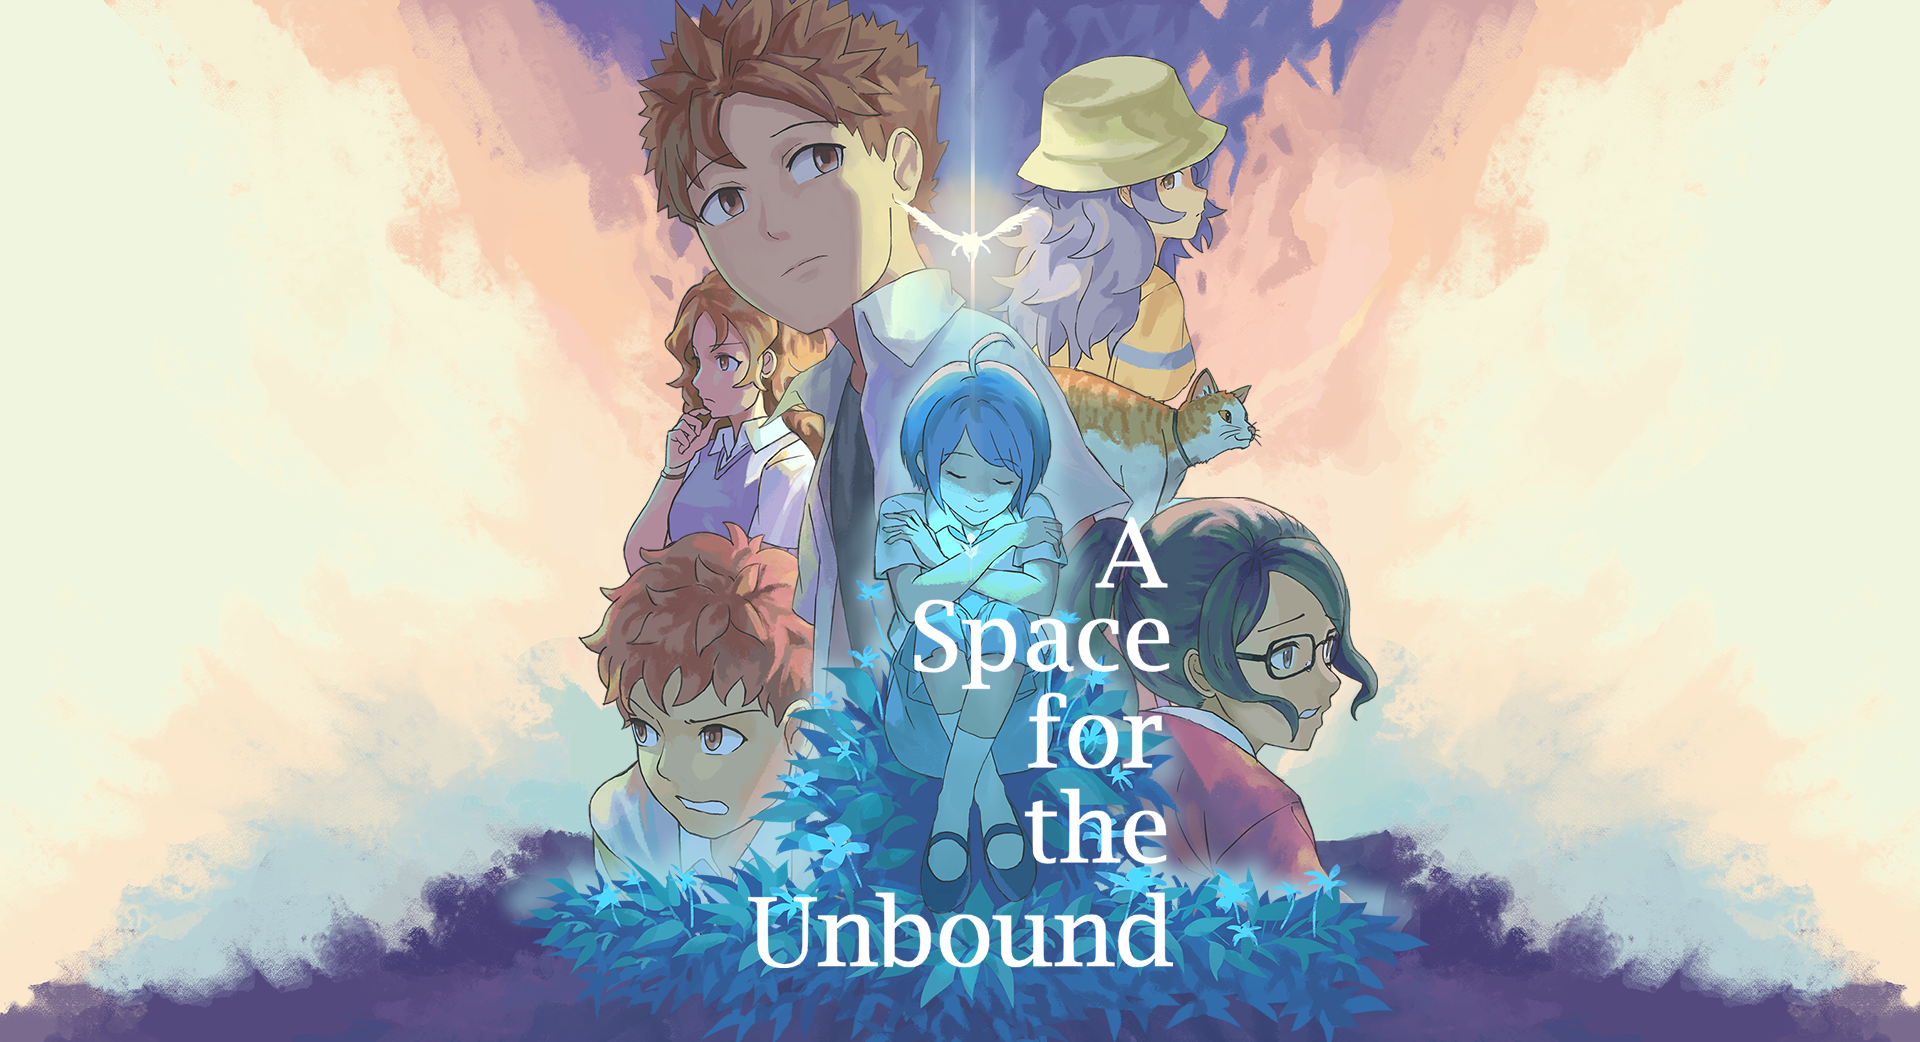 Narasi indie Indonesia A Space for the Unbound kini tersedia